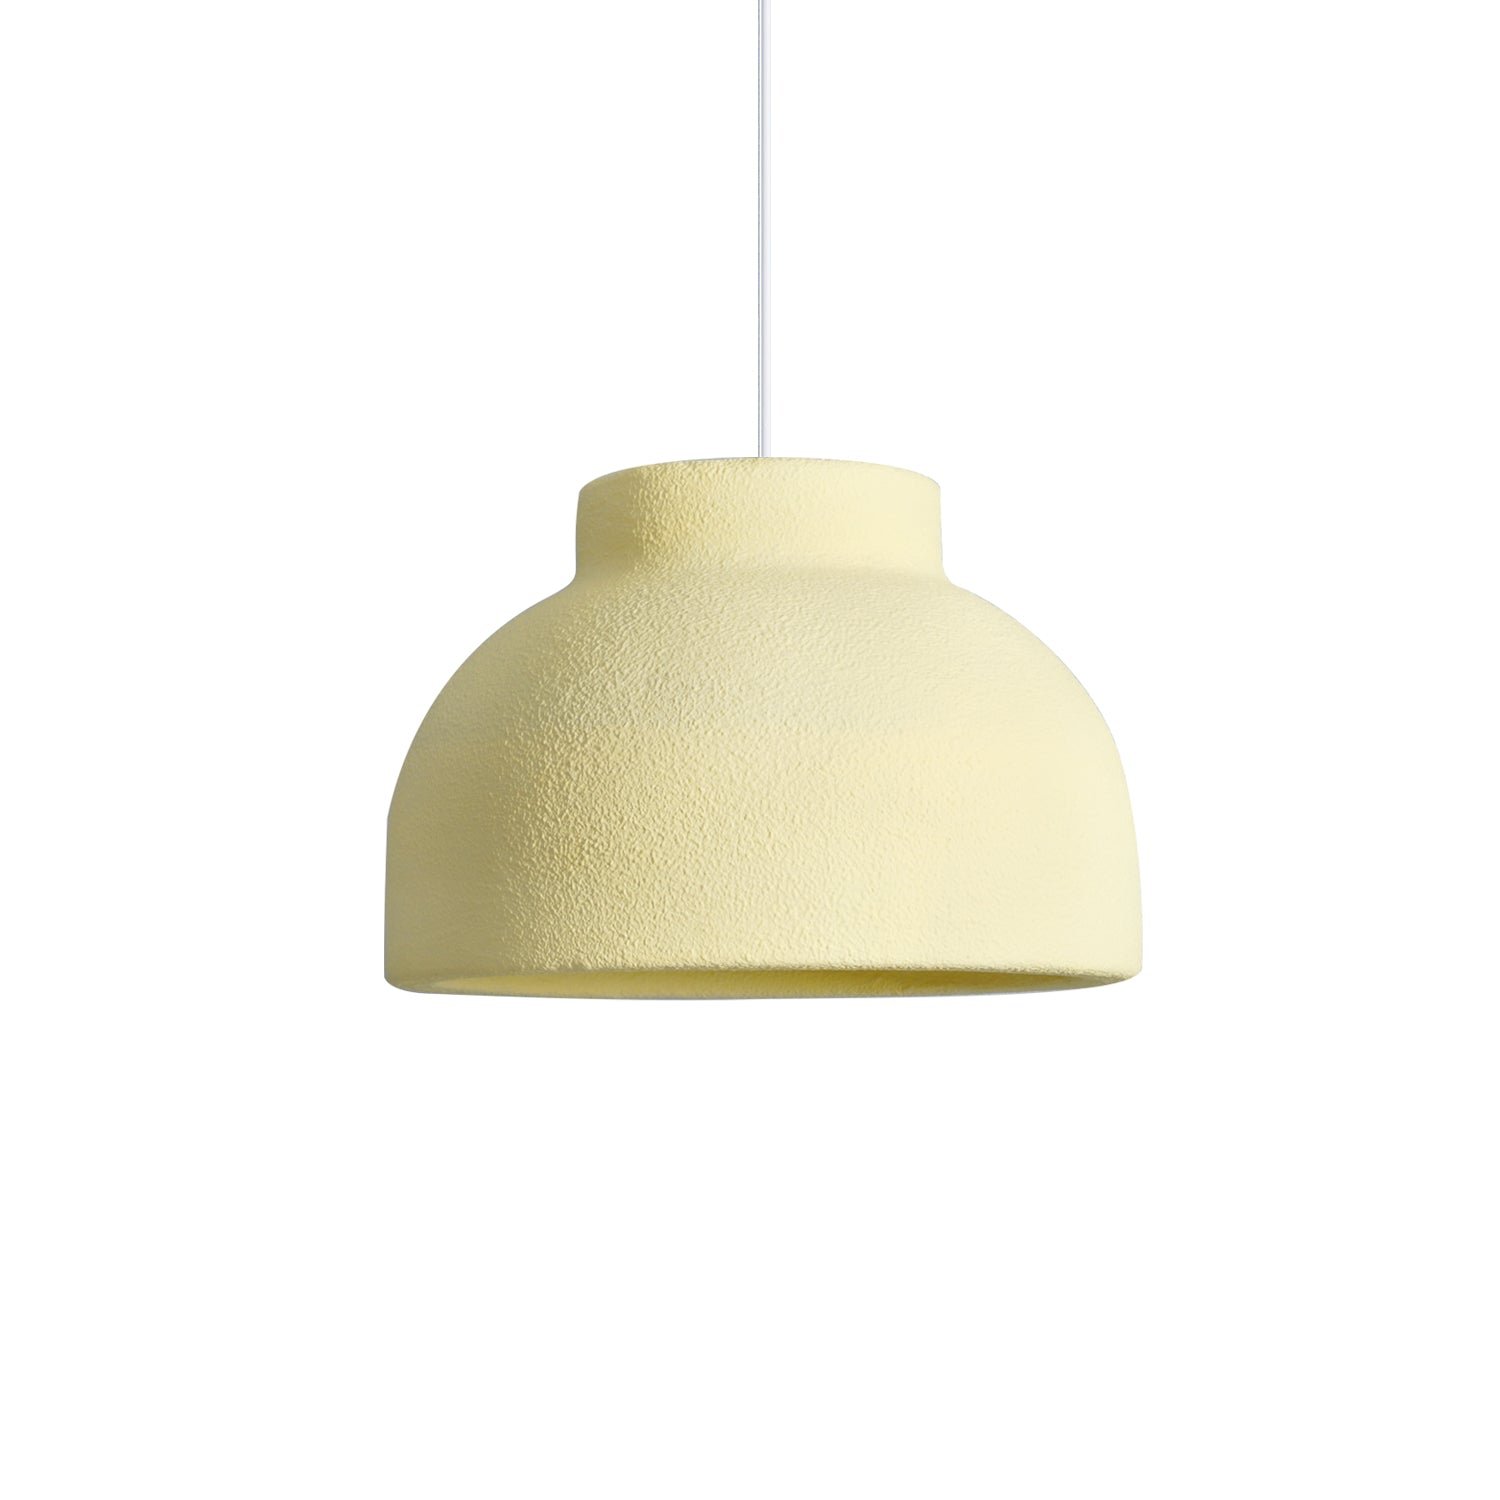 Yellow Grain Pendant Lamp - Dimensions: 23.2 inches in diameter and 15.7 inches in height (59cm x 40cm)